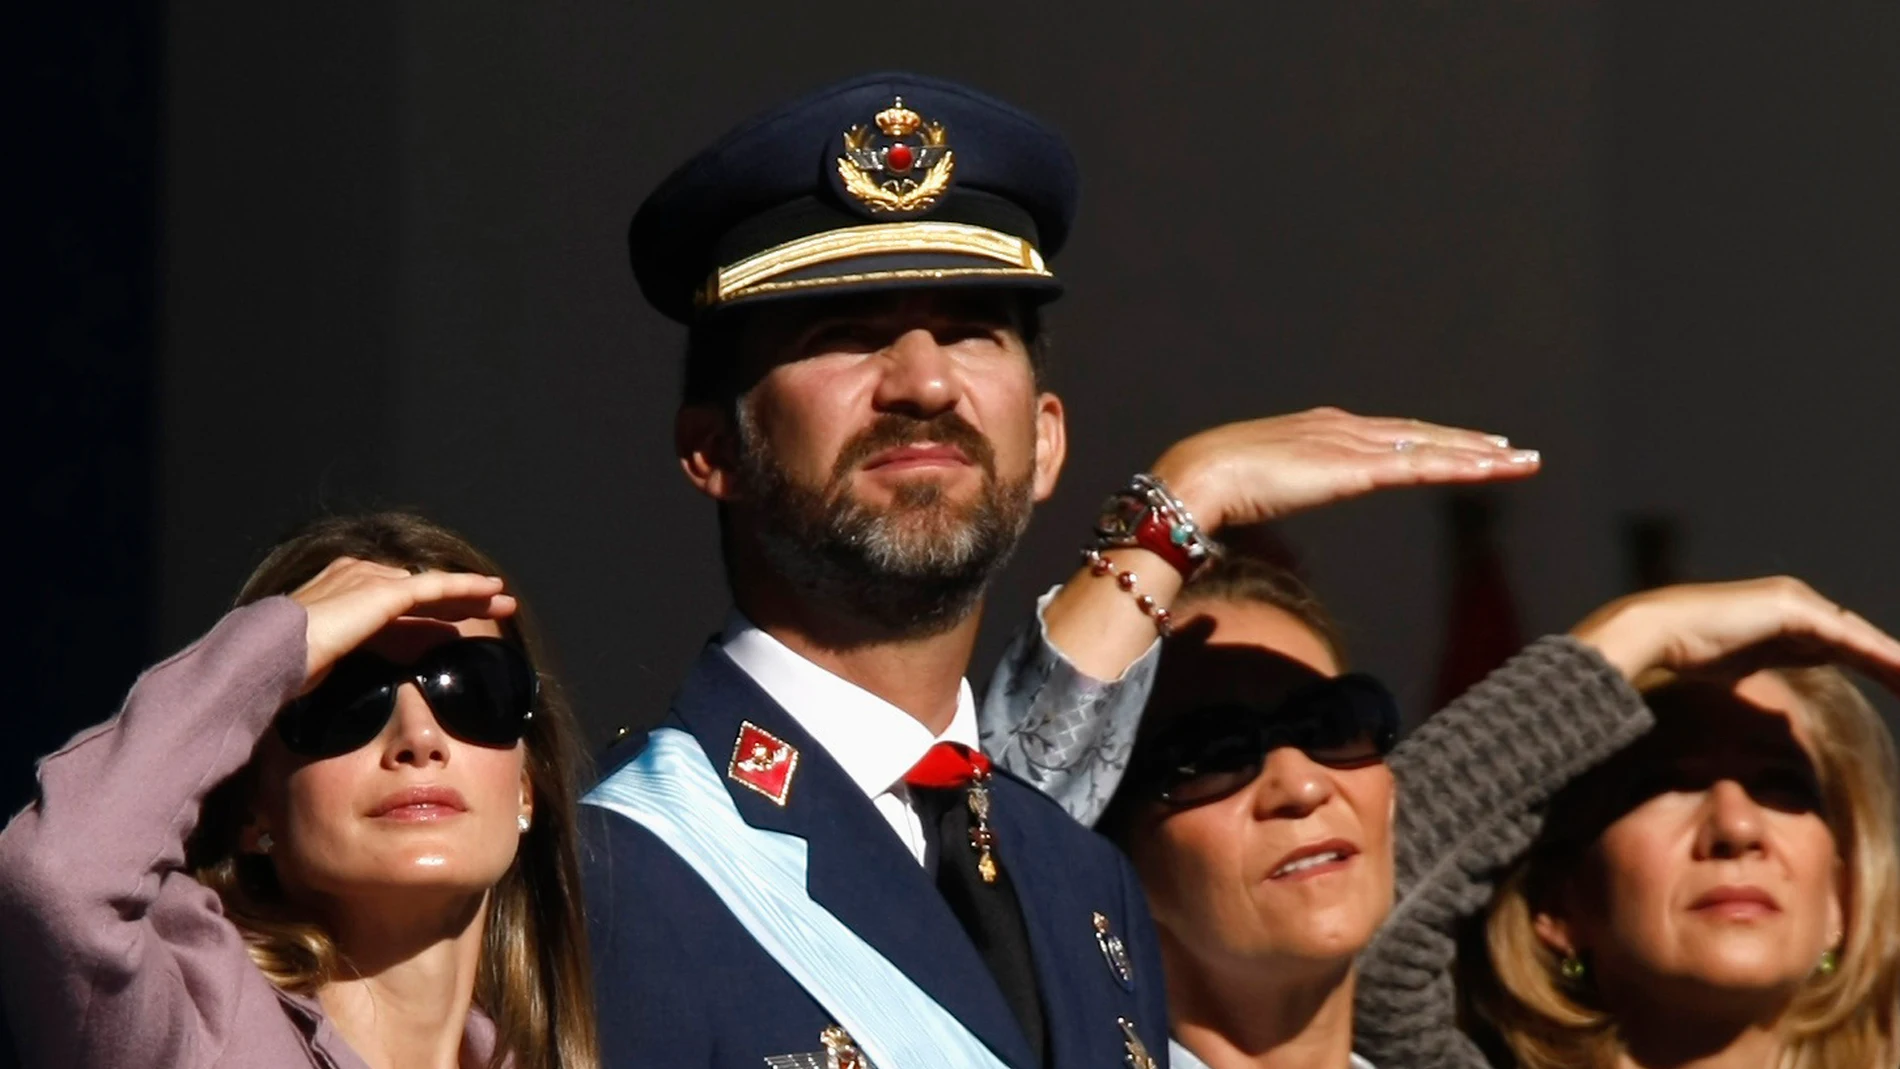 Members of the Spanish royal family (L-R) Princess Letizia, Crown Prince Felipe, Infanta Elena, Infanta Cristina and King Juan Carlos watch a military parade during Spain's National Day in Madrid October 12, 2009.